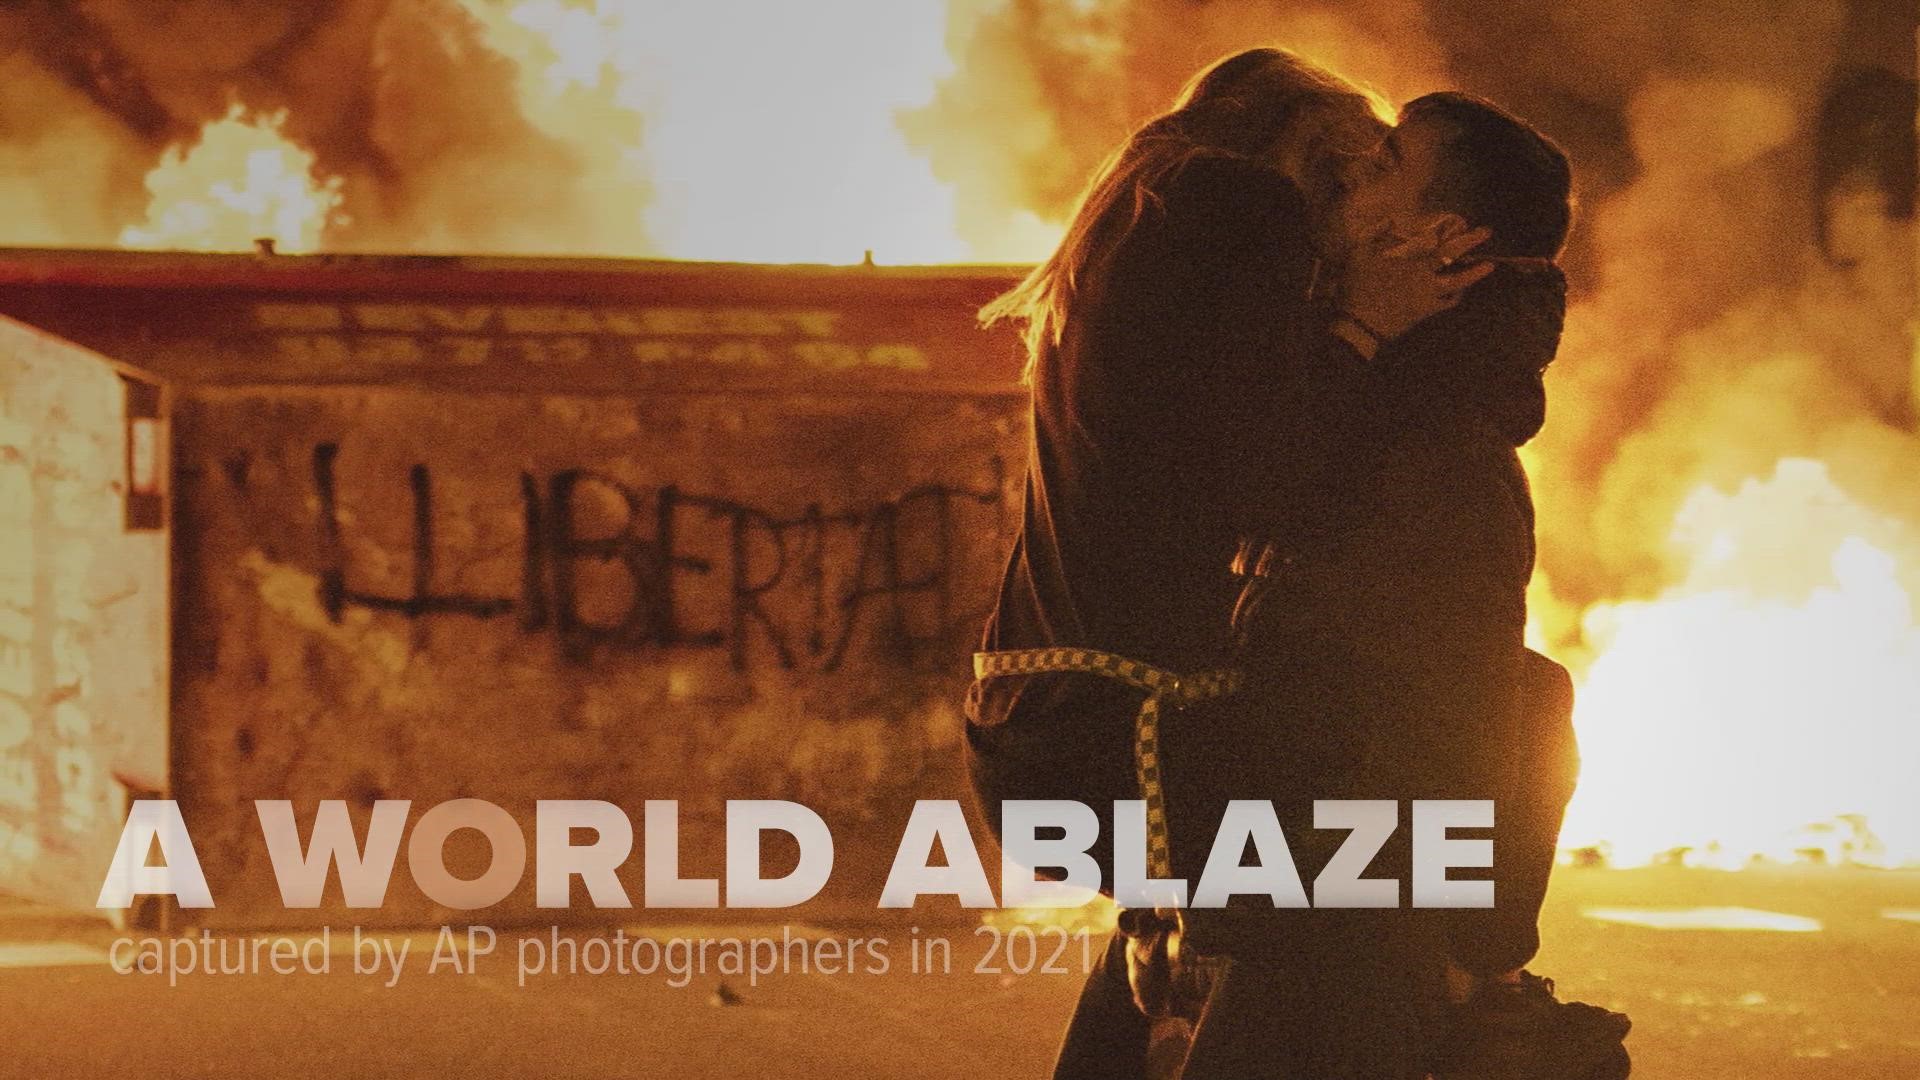 Associated Press photographers captured scenes of a world ablaze in 2021, amid rumblings of ruin.